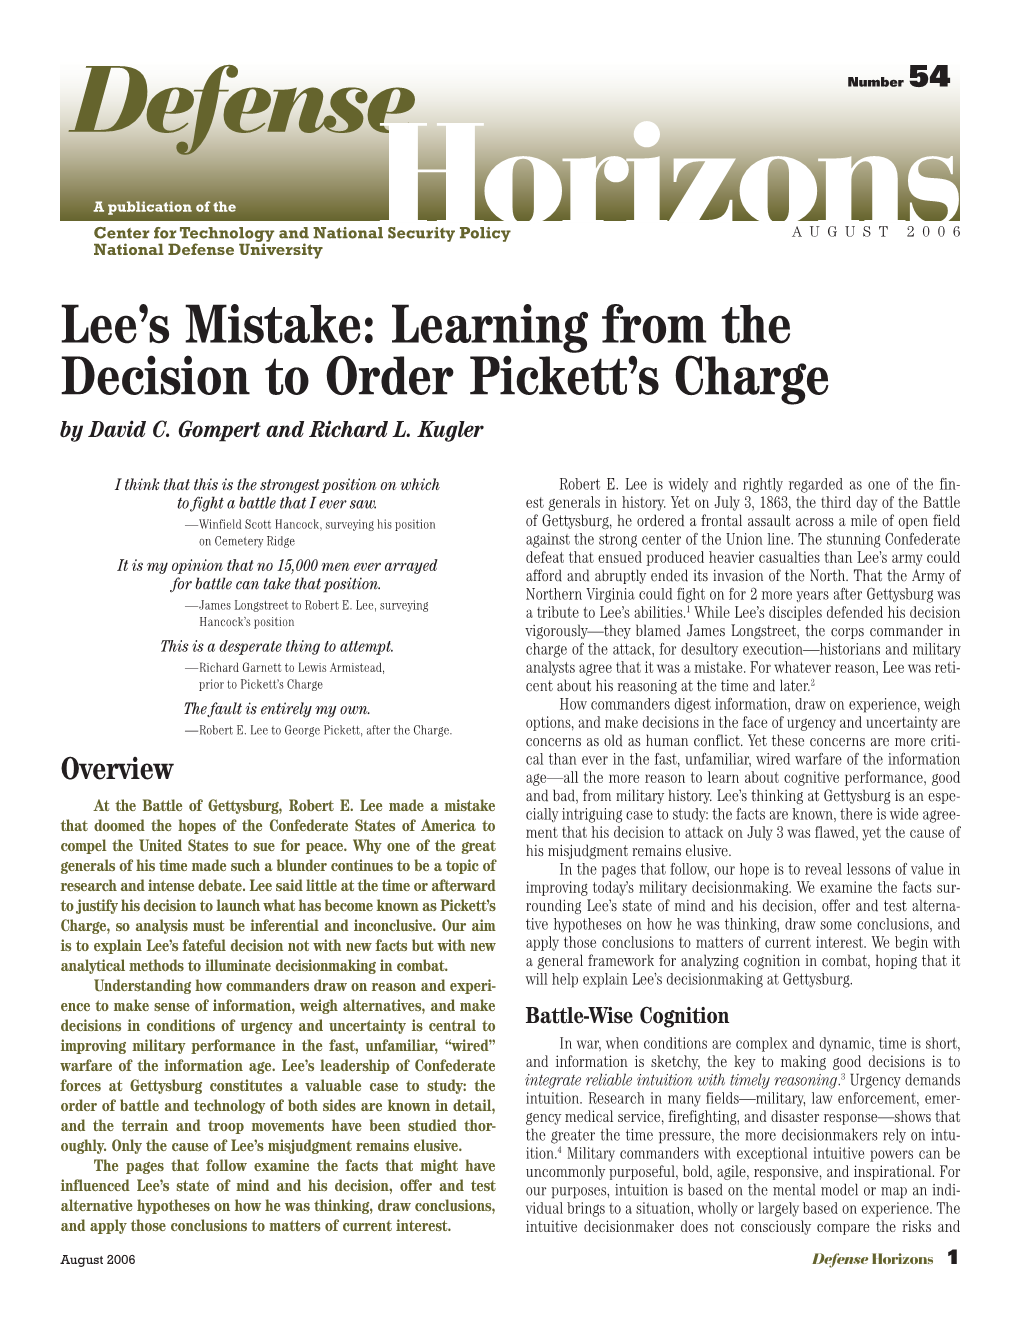 Lee's Mistake: Learning from the Decision to Order Pickett's Charge